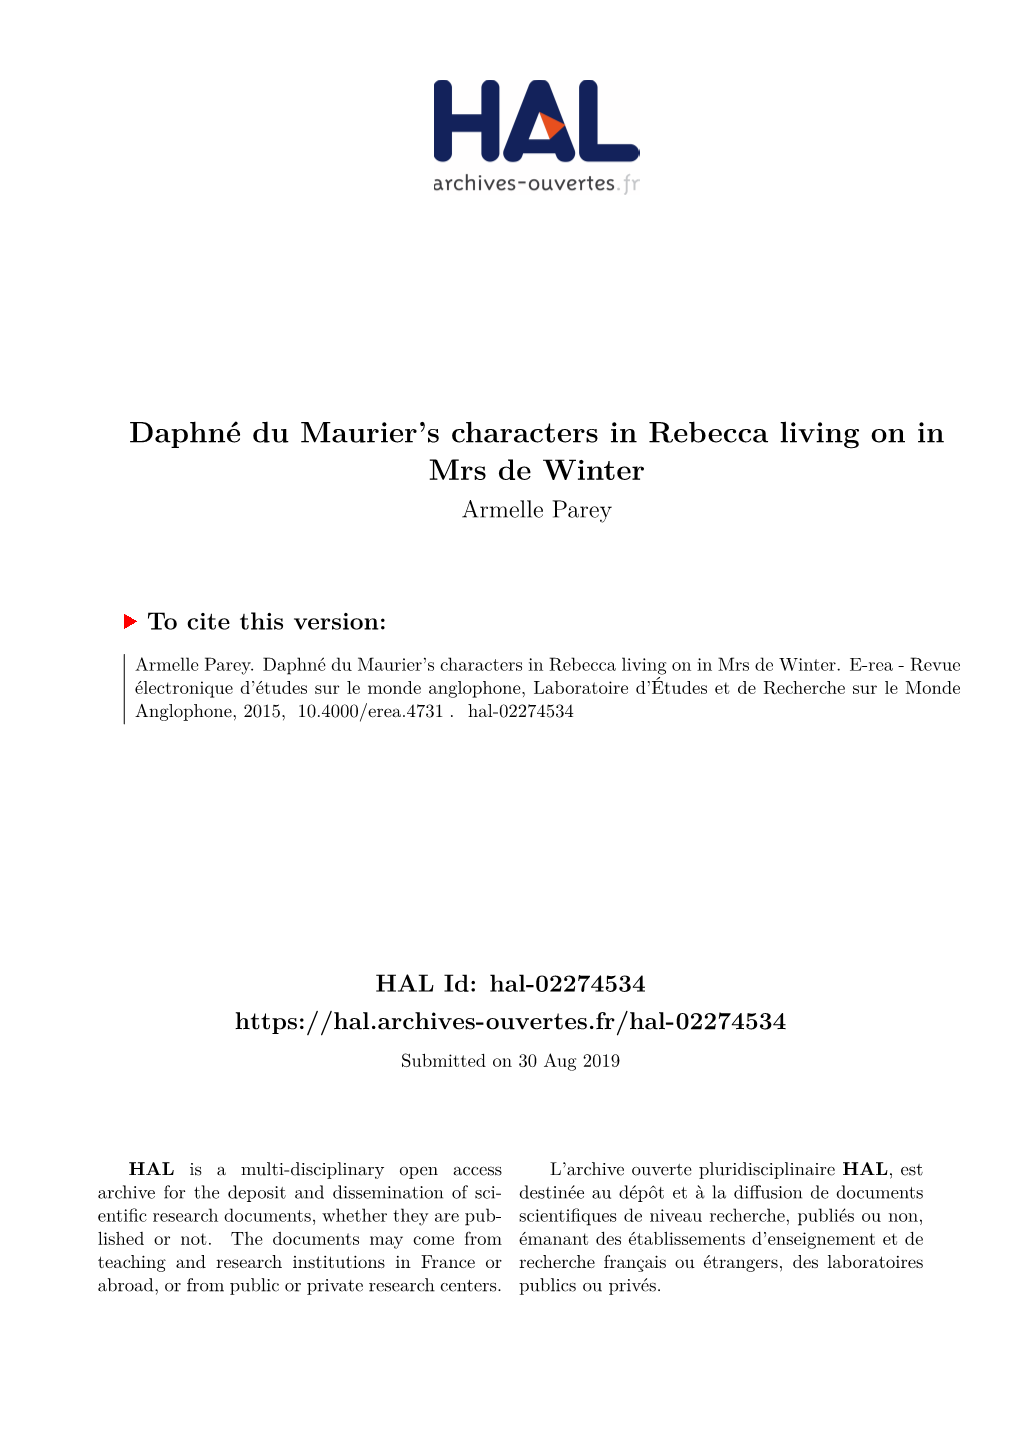 Daphné Du Maurier's Characters in Rebecca Living on in Mrs De Winter